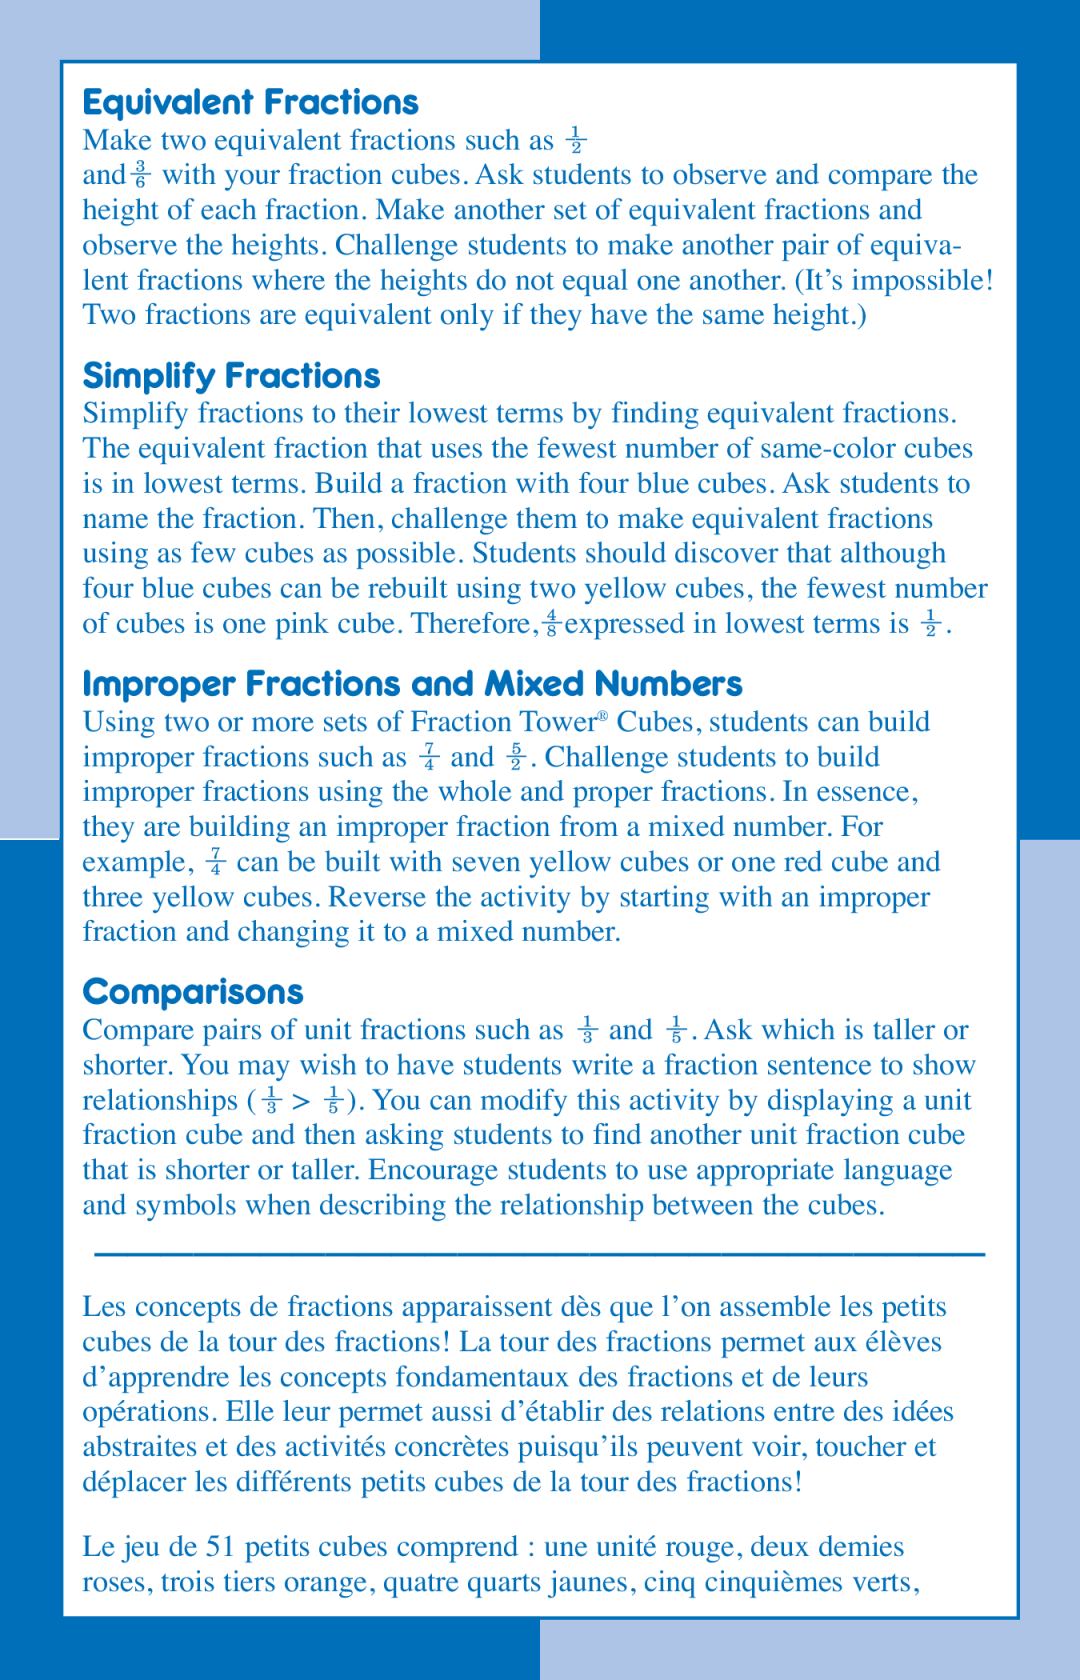 Learning Resources LER 2510 manual MakeEquivalenttwo equivalentFractionsfractions such as 